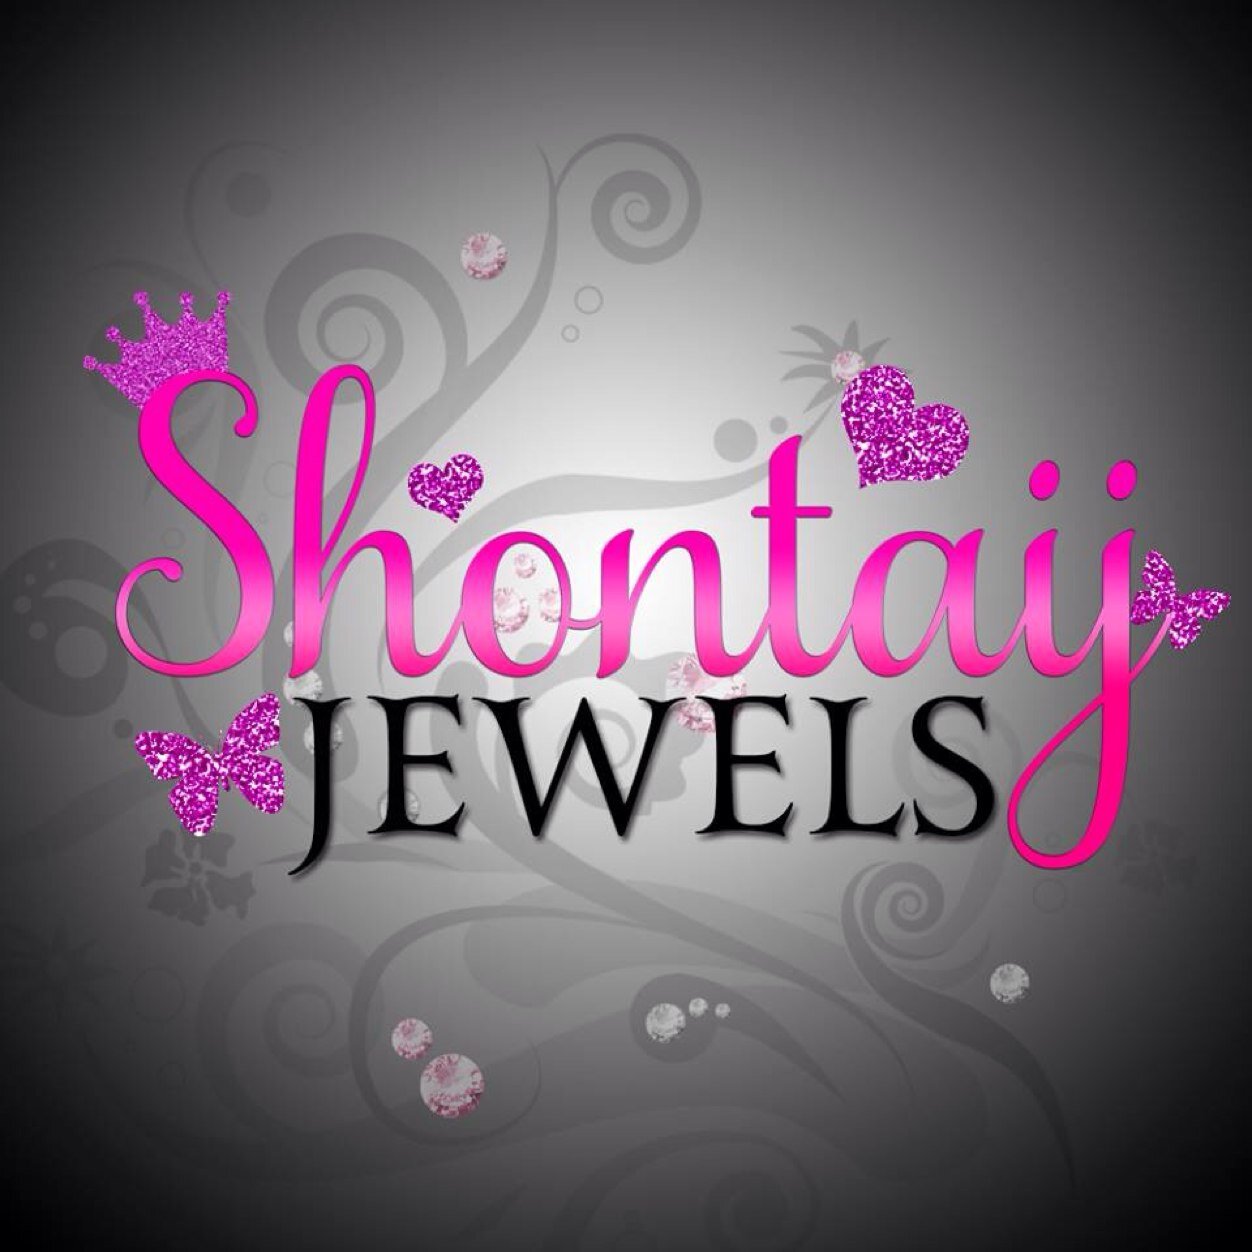 Shontaij Jewels specialises in handcrafted bespoke Fashion jewellery and accessories,bringing celebrity style to you